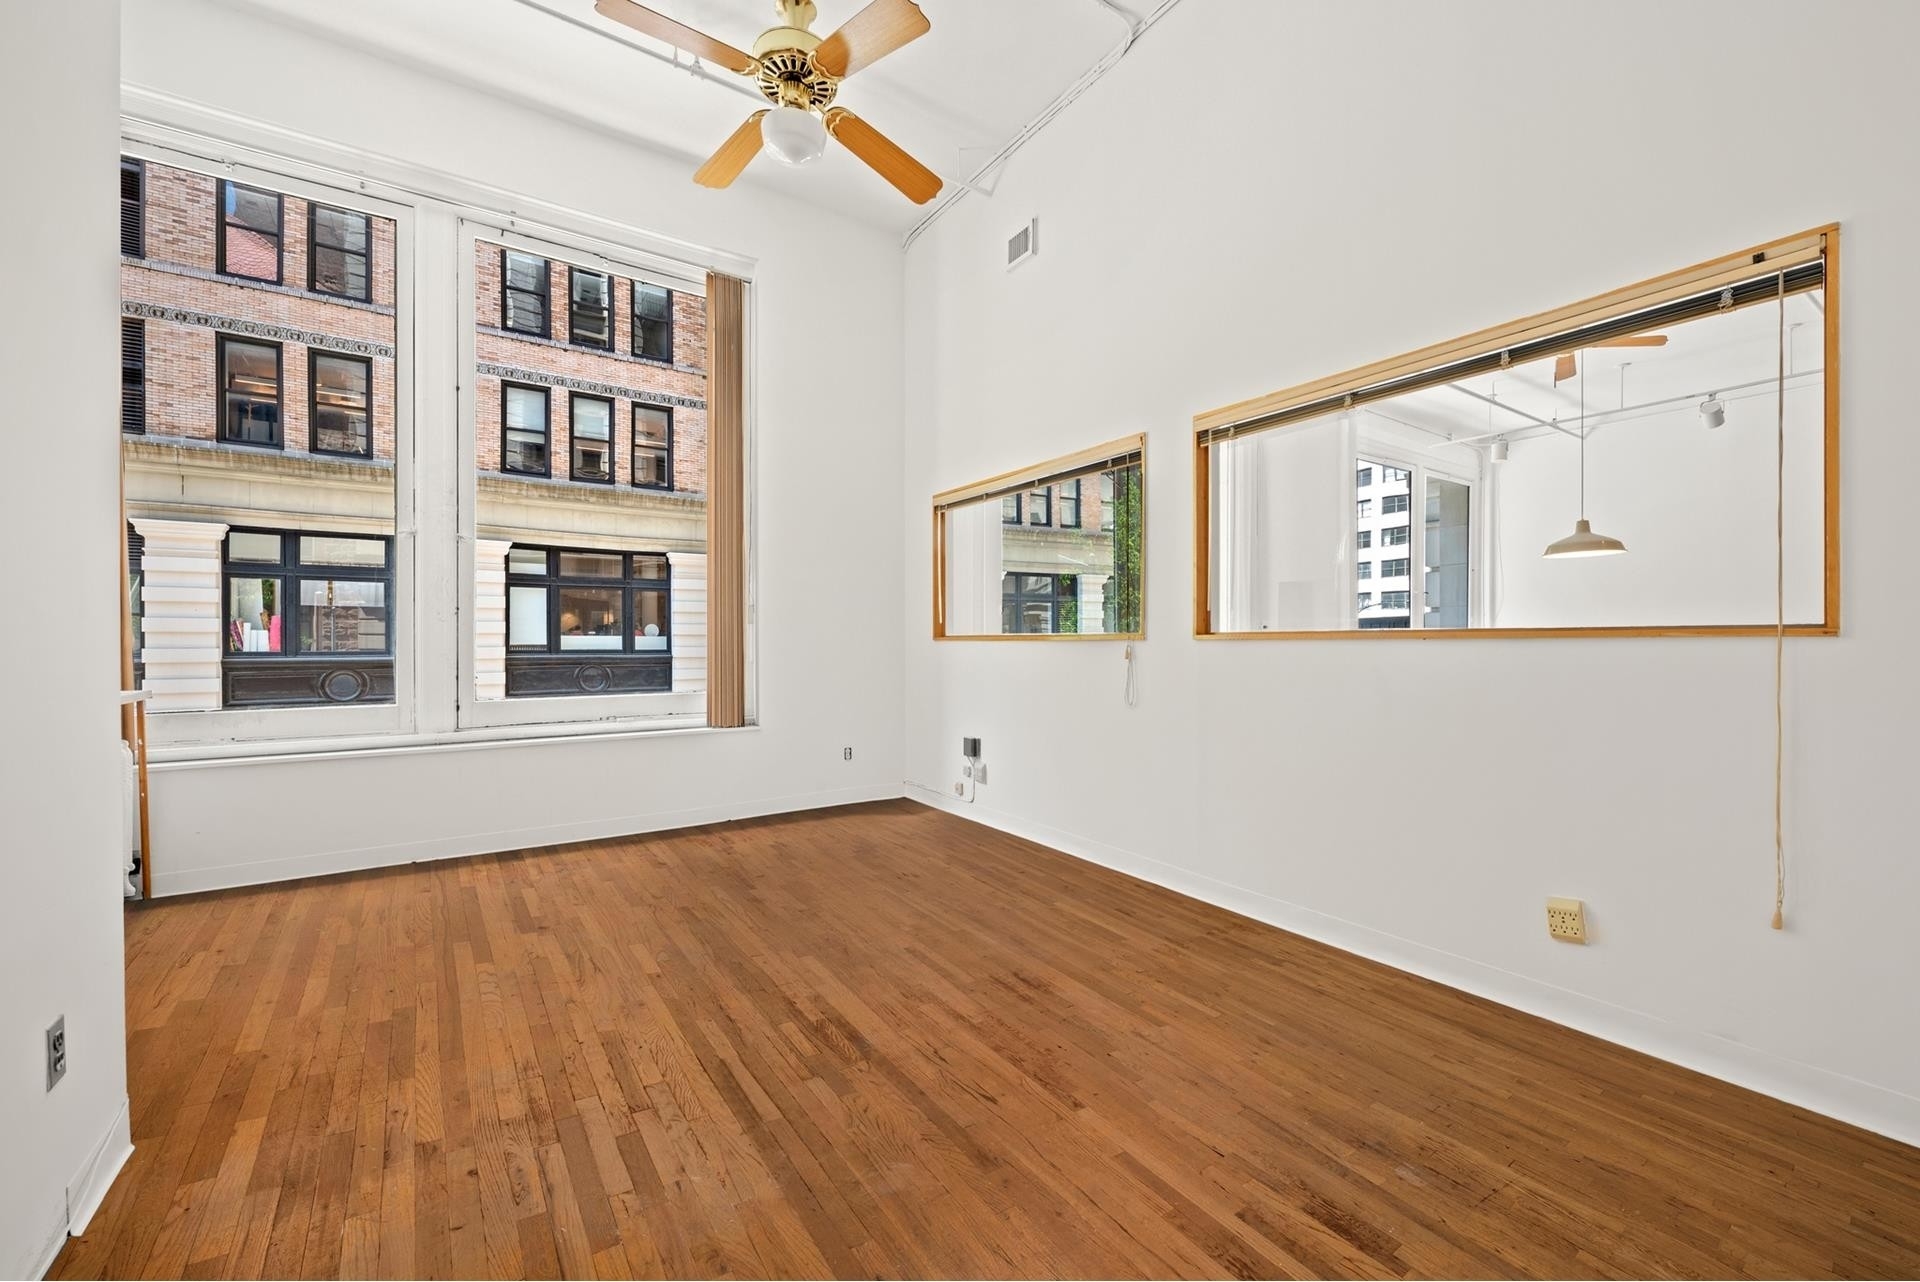 7. Co-op Properties for Sale at The Kensington, 73 FIFTH AVE, 2B Union Square, New York, NY 10003